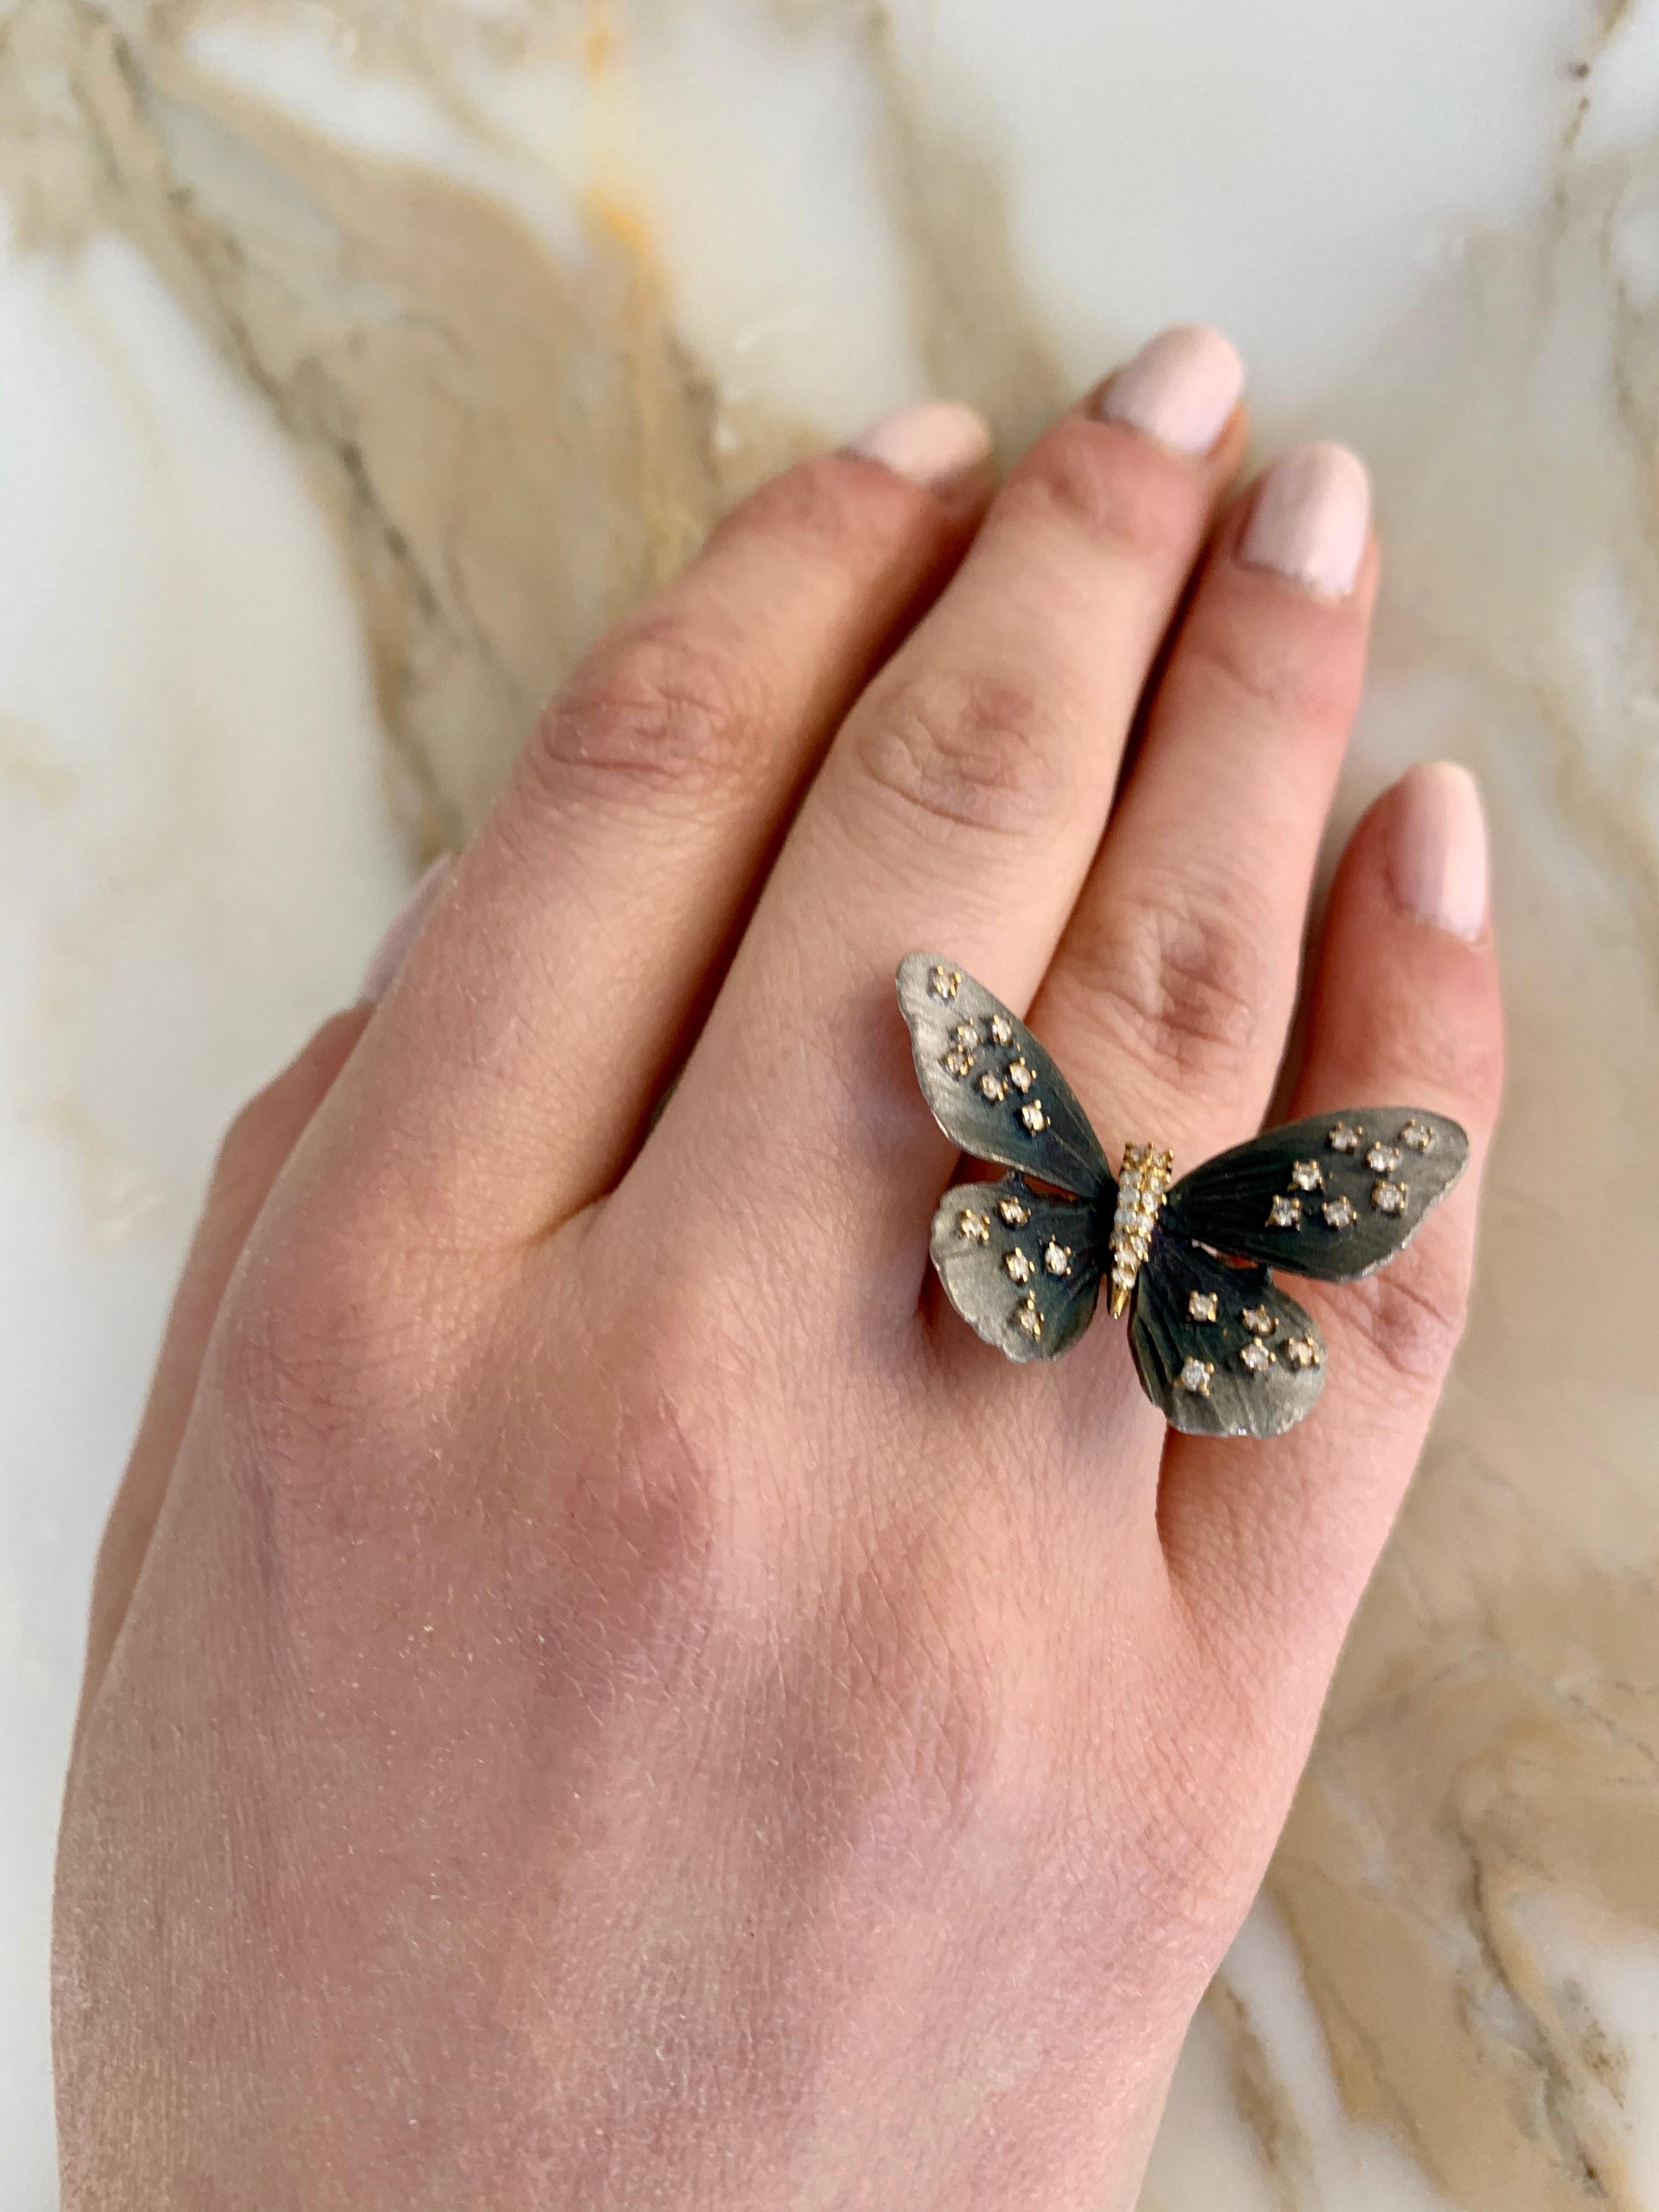 Gray-Brown Collection

Butterfly tainted gray rhodium rind with Diamonds set in 18K yellow gold. US size 6.75

Diamonds: 0.46ct total weight.
All Diamonds are G-H / SI stones


